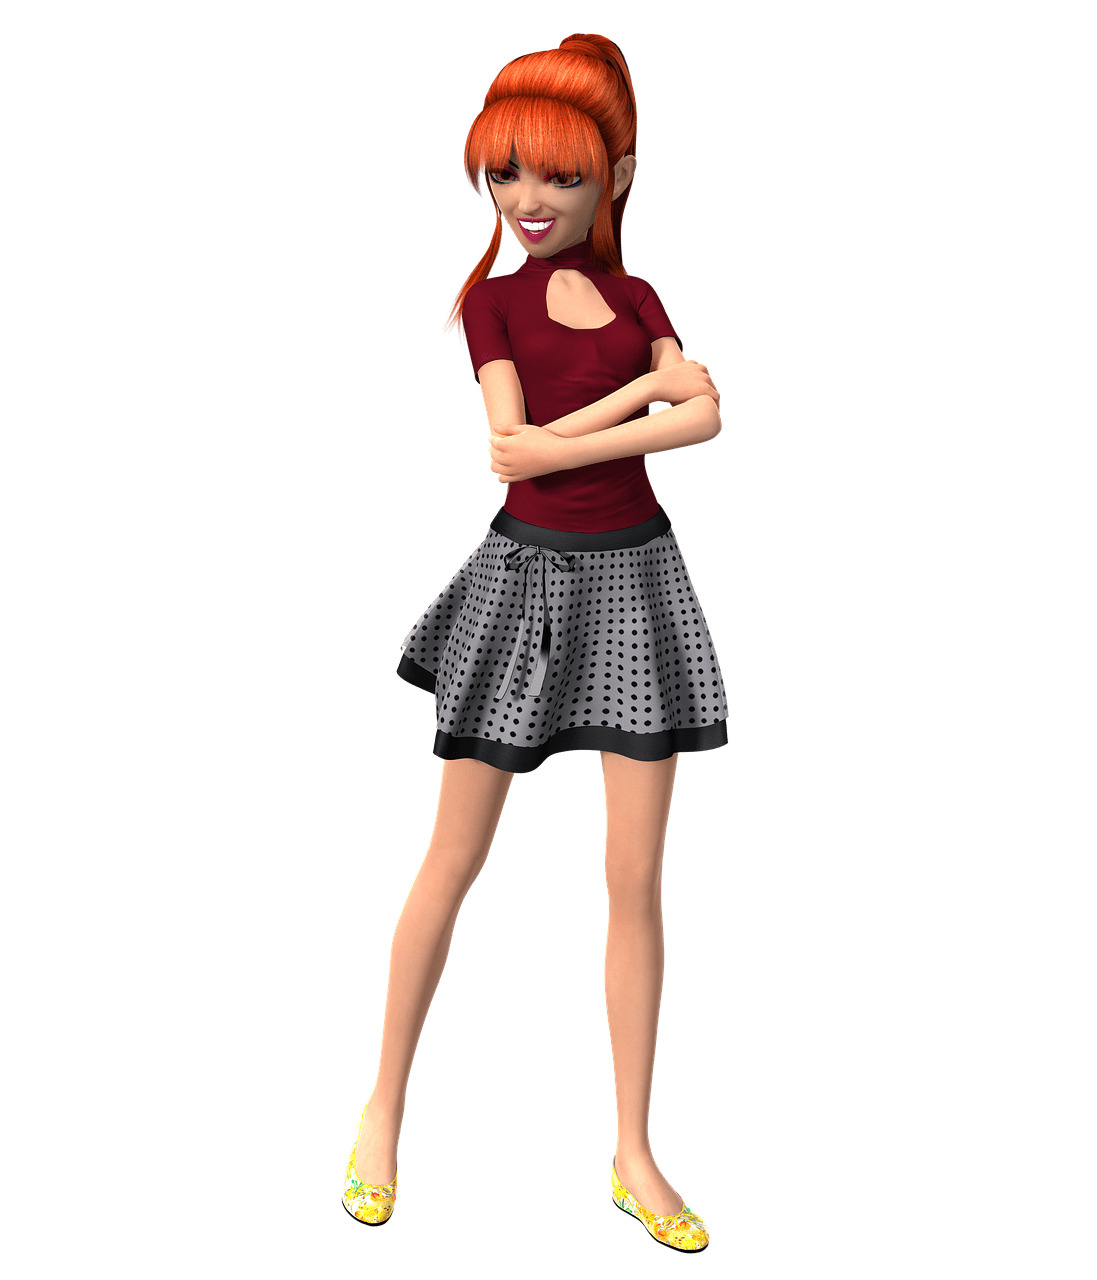 Woman Red Hair png